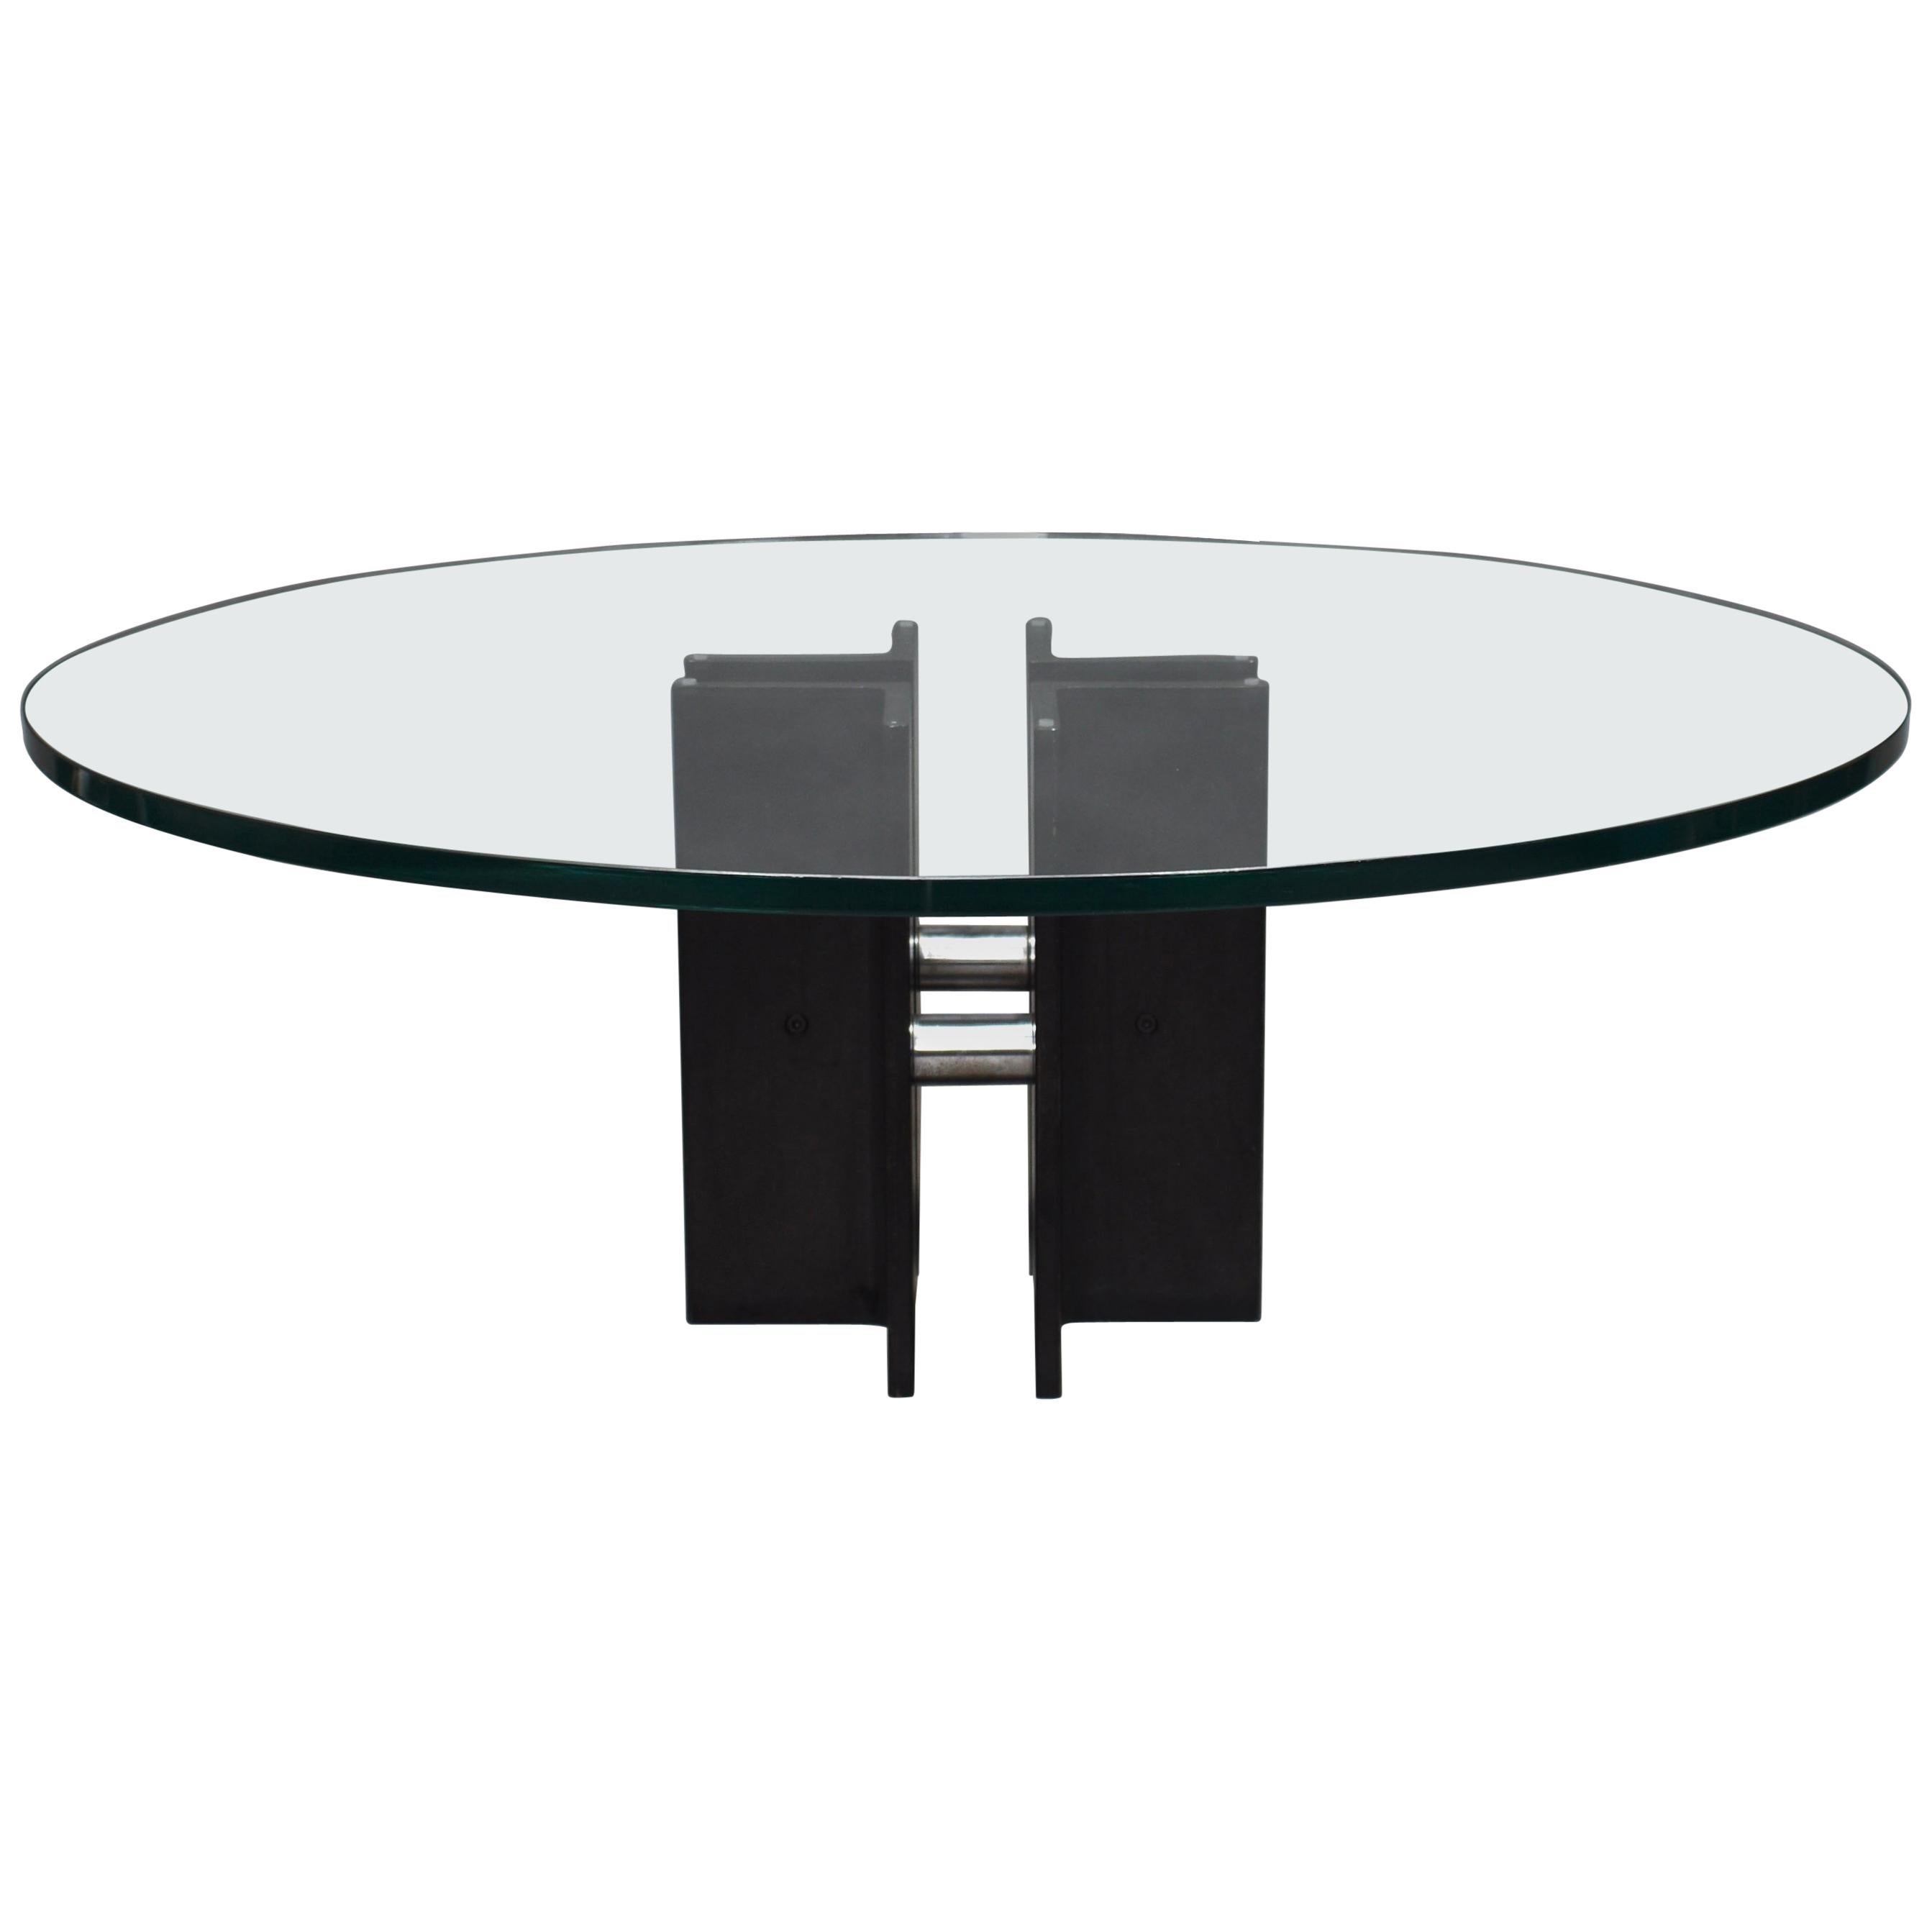 Mid-Century Modern Coffee Table in Steel, Chrome and Glass, circa 1970